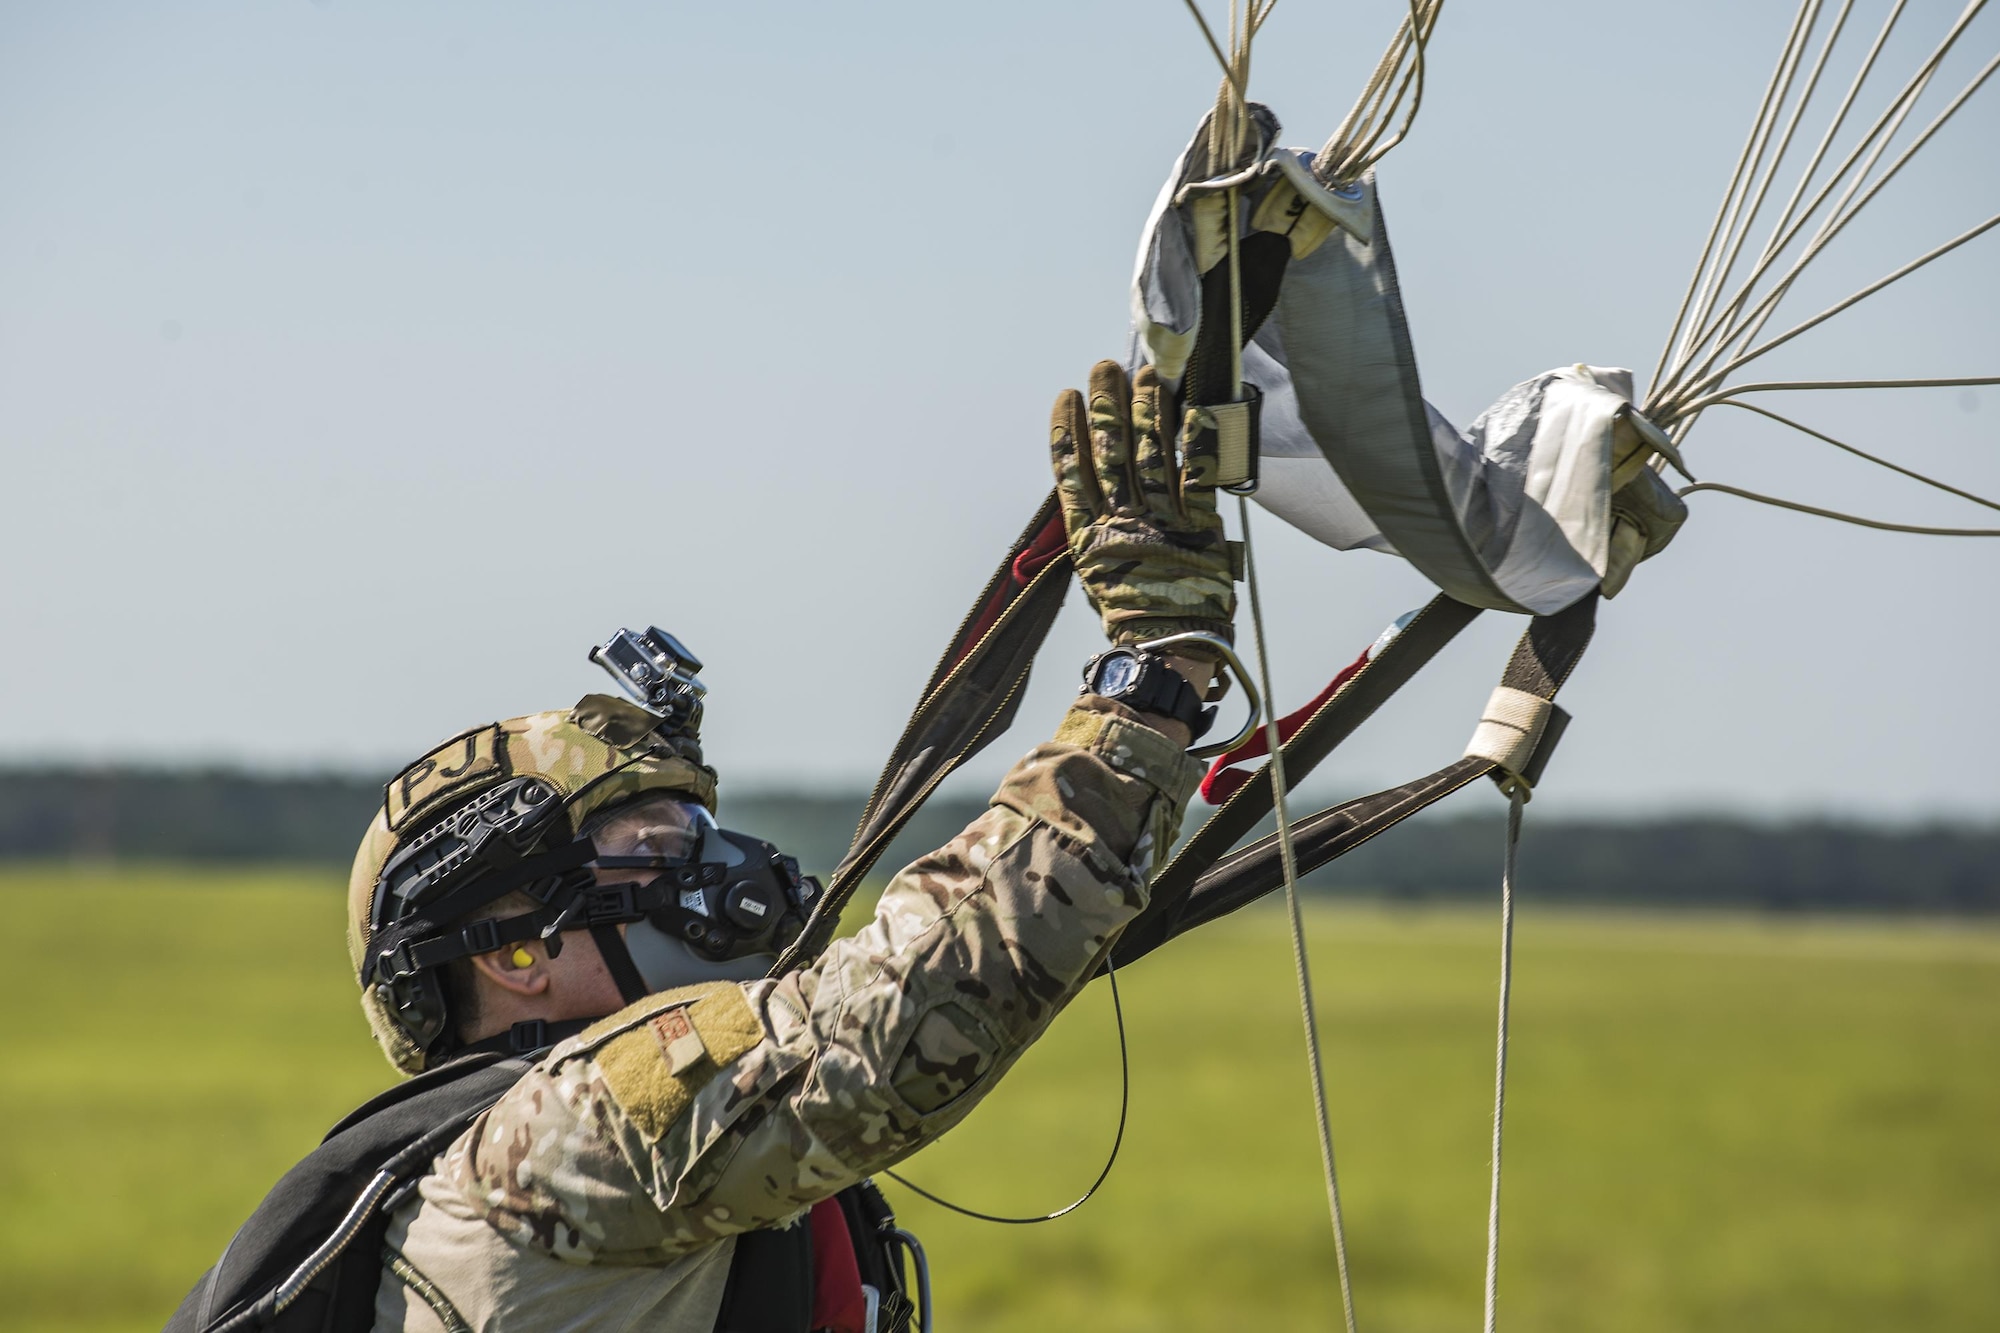 U.S. Air Force Master Sgt. Christian Egger, 347th Rescue Group pararescueman, collects his parachute after landing from a high-altitude, low-opening jump, Aug. 18, 2016, at Moody Air Force Base, Ga. During operations at high altitudes, crewmembers are required to breathe 100 percent pure oxygen to combat the lowered oxygen levels present. (U.S. Air Force photo by Airman 1st Class Daniel Snider)